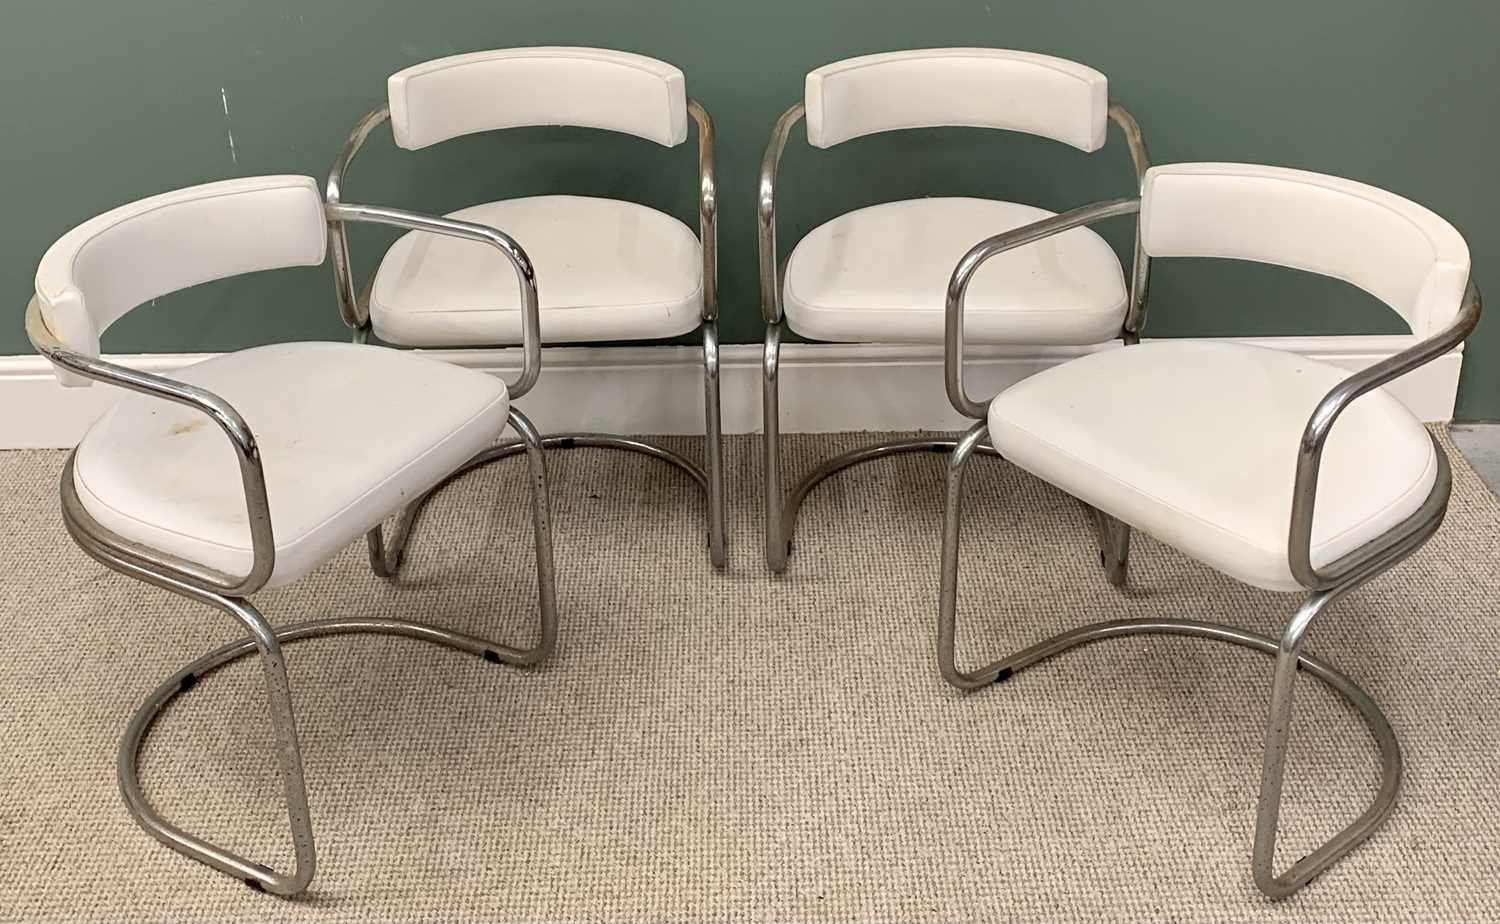 RETRO TUB TYPE DINING CHAIRS - set of four with vinyl seats and backs within chrome frames, 72cms H,